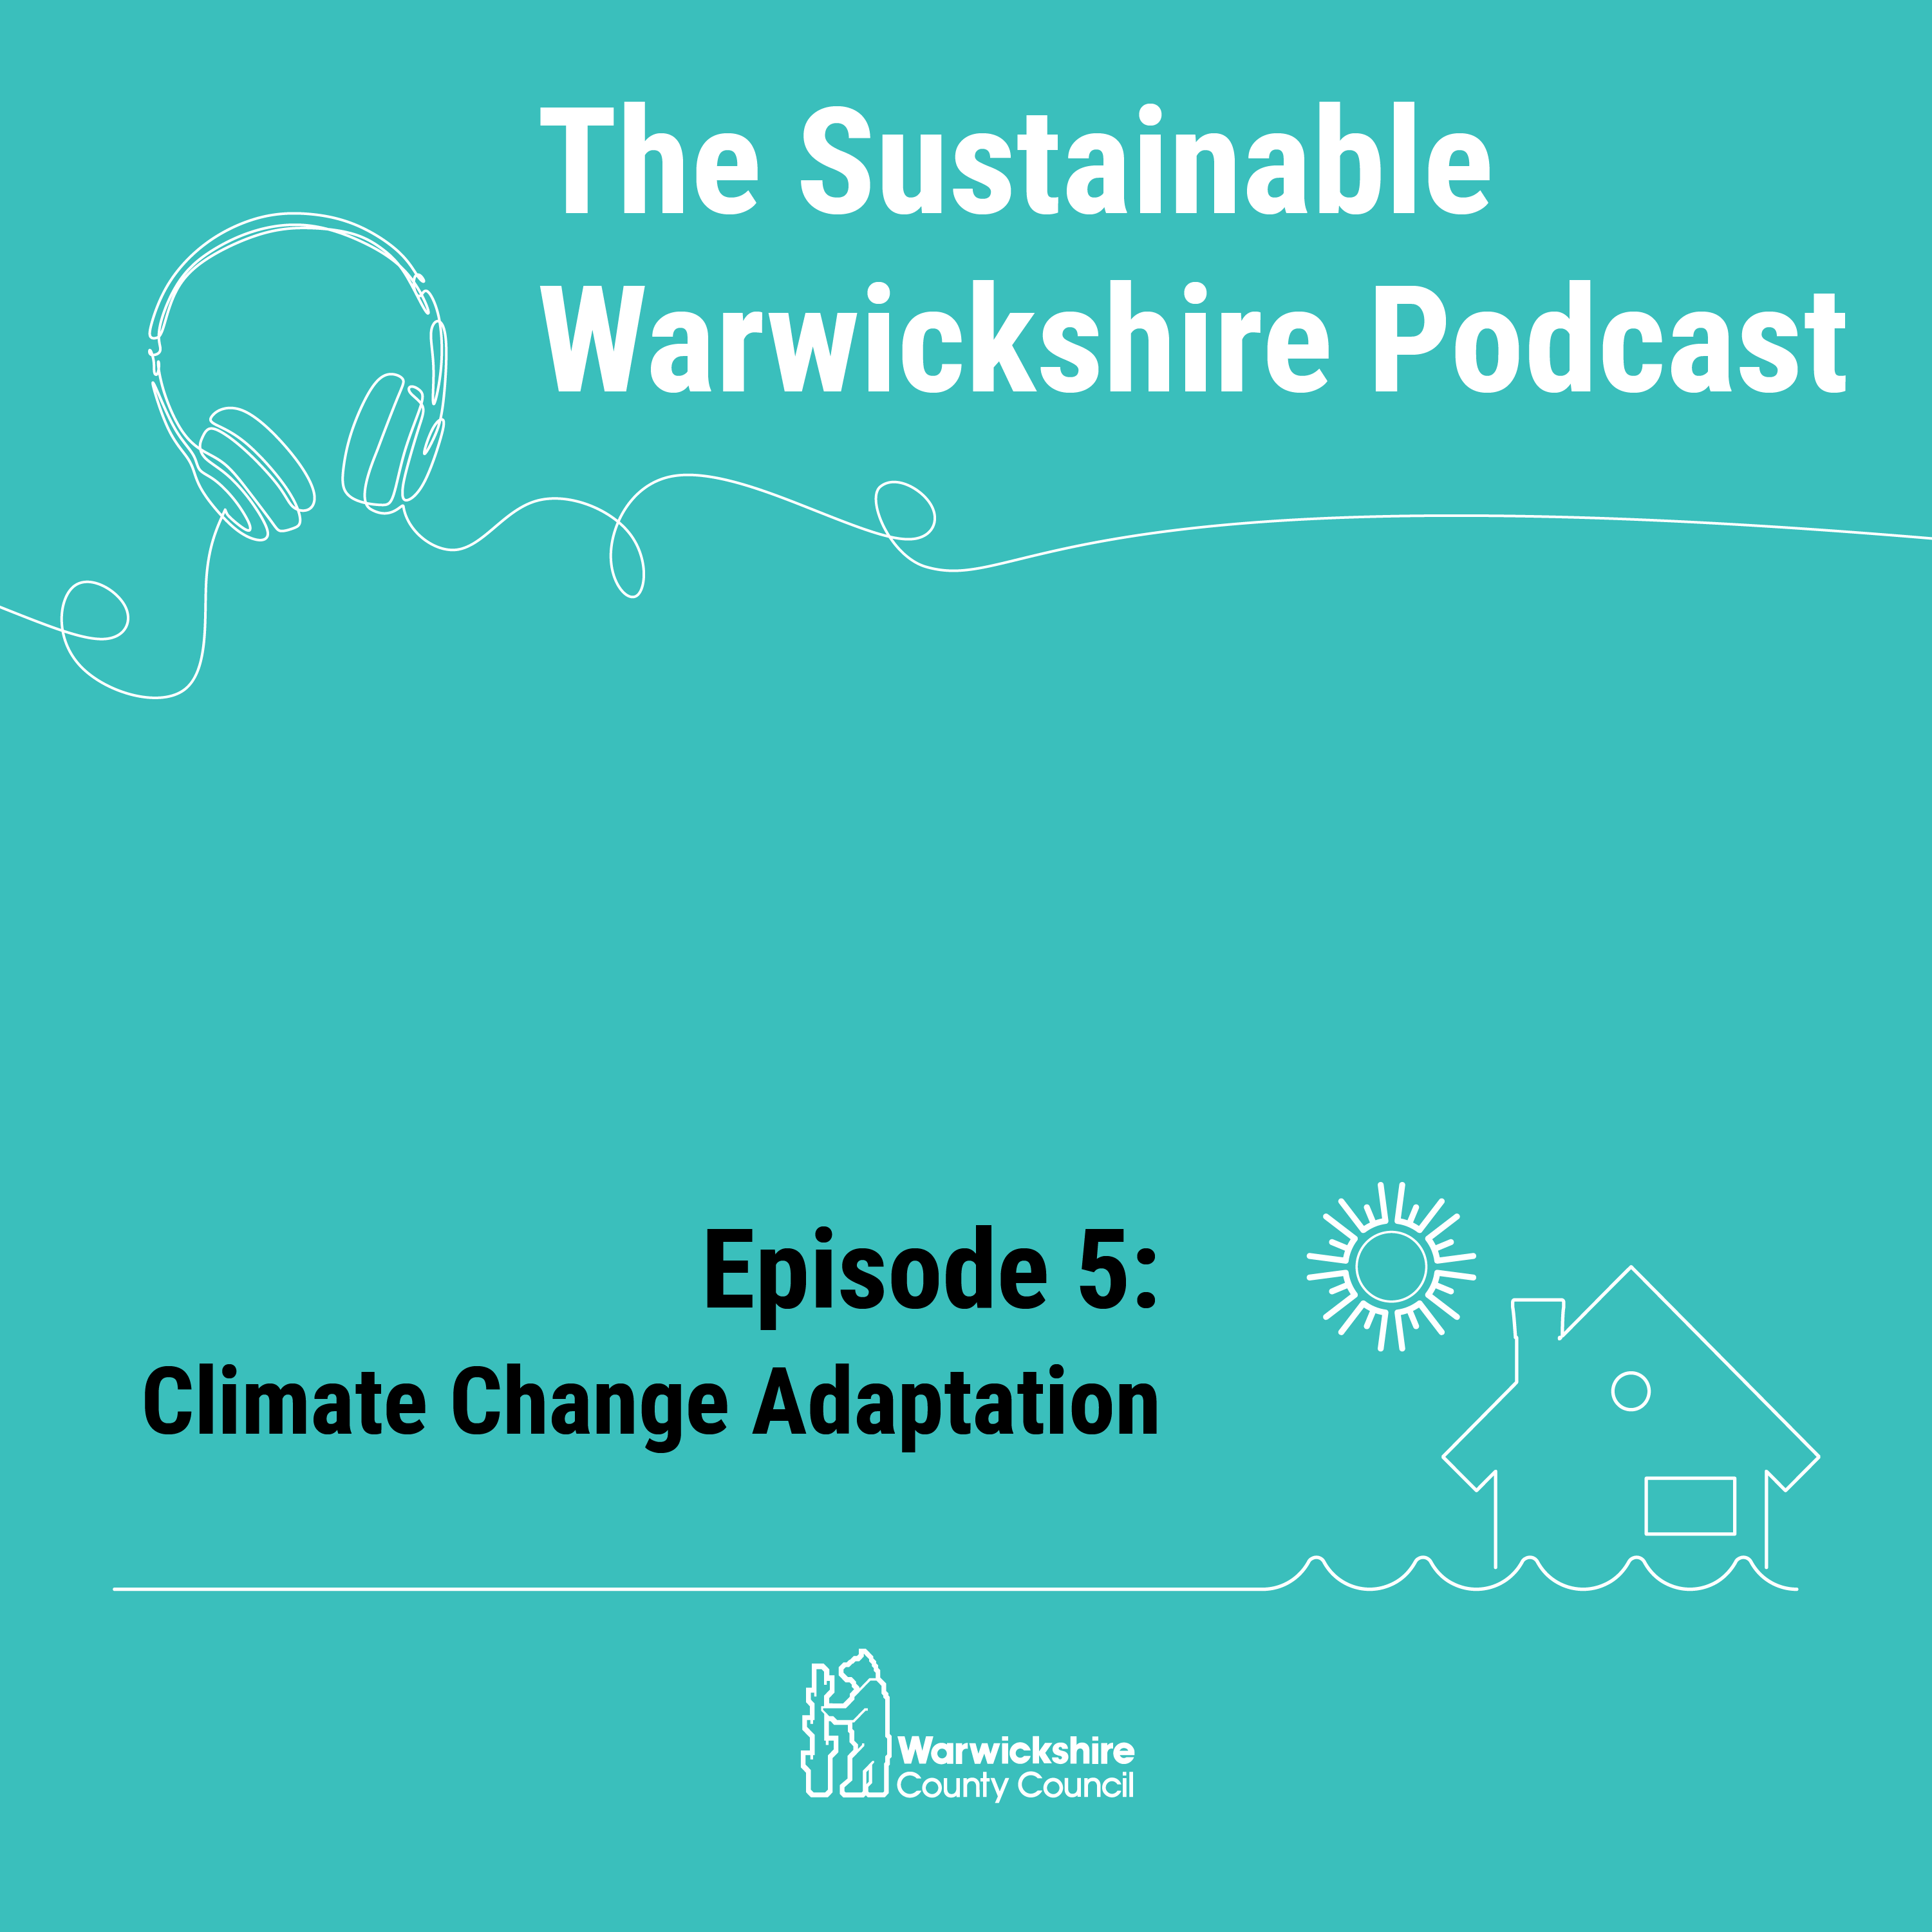 The Sustainable Warwickshire Podcast. Episode 5 - Climate Change Adaptation.